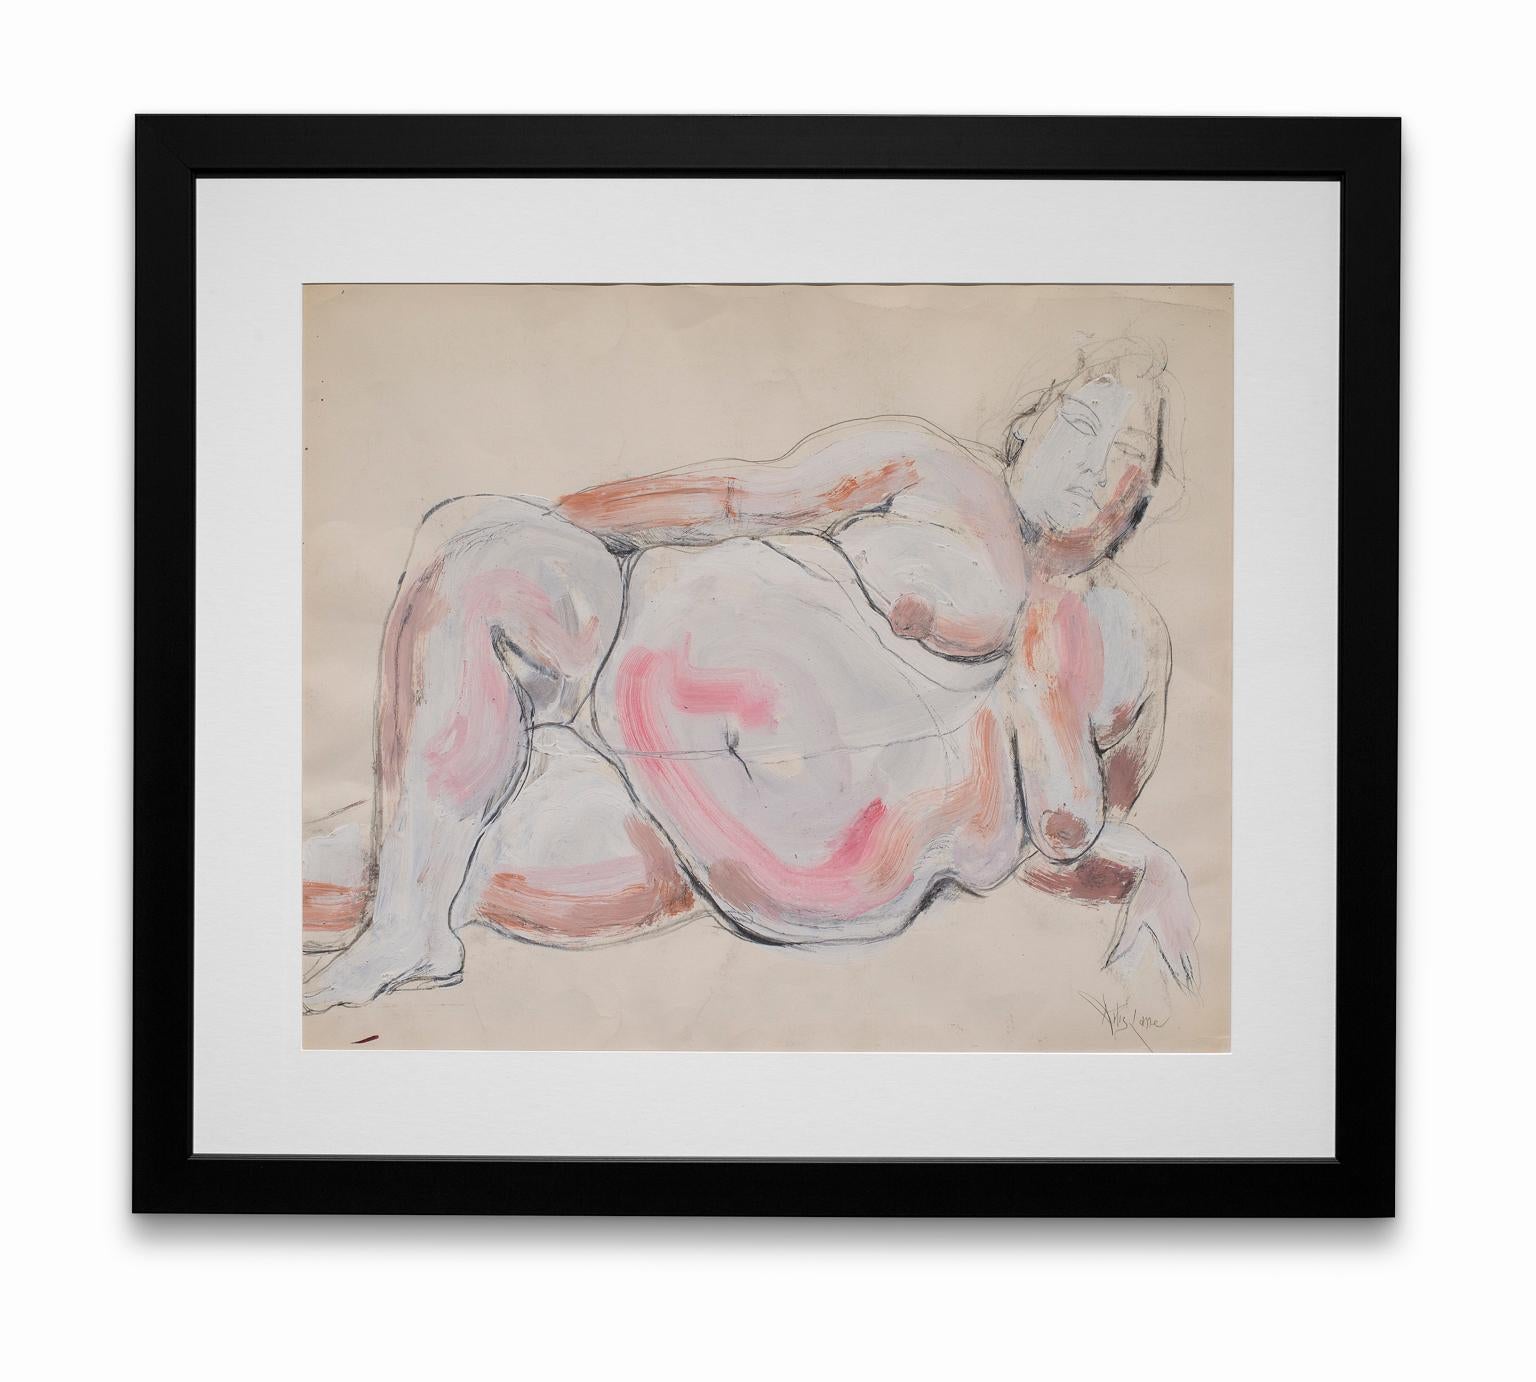 Artis Lane Nude Painting - "Goddess II", Acrylic and Graphite on Paper